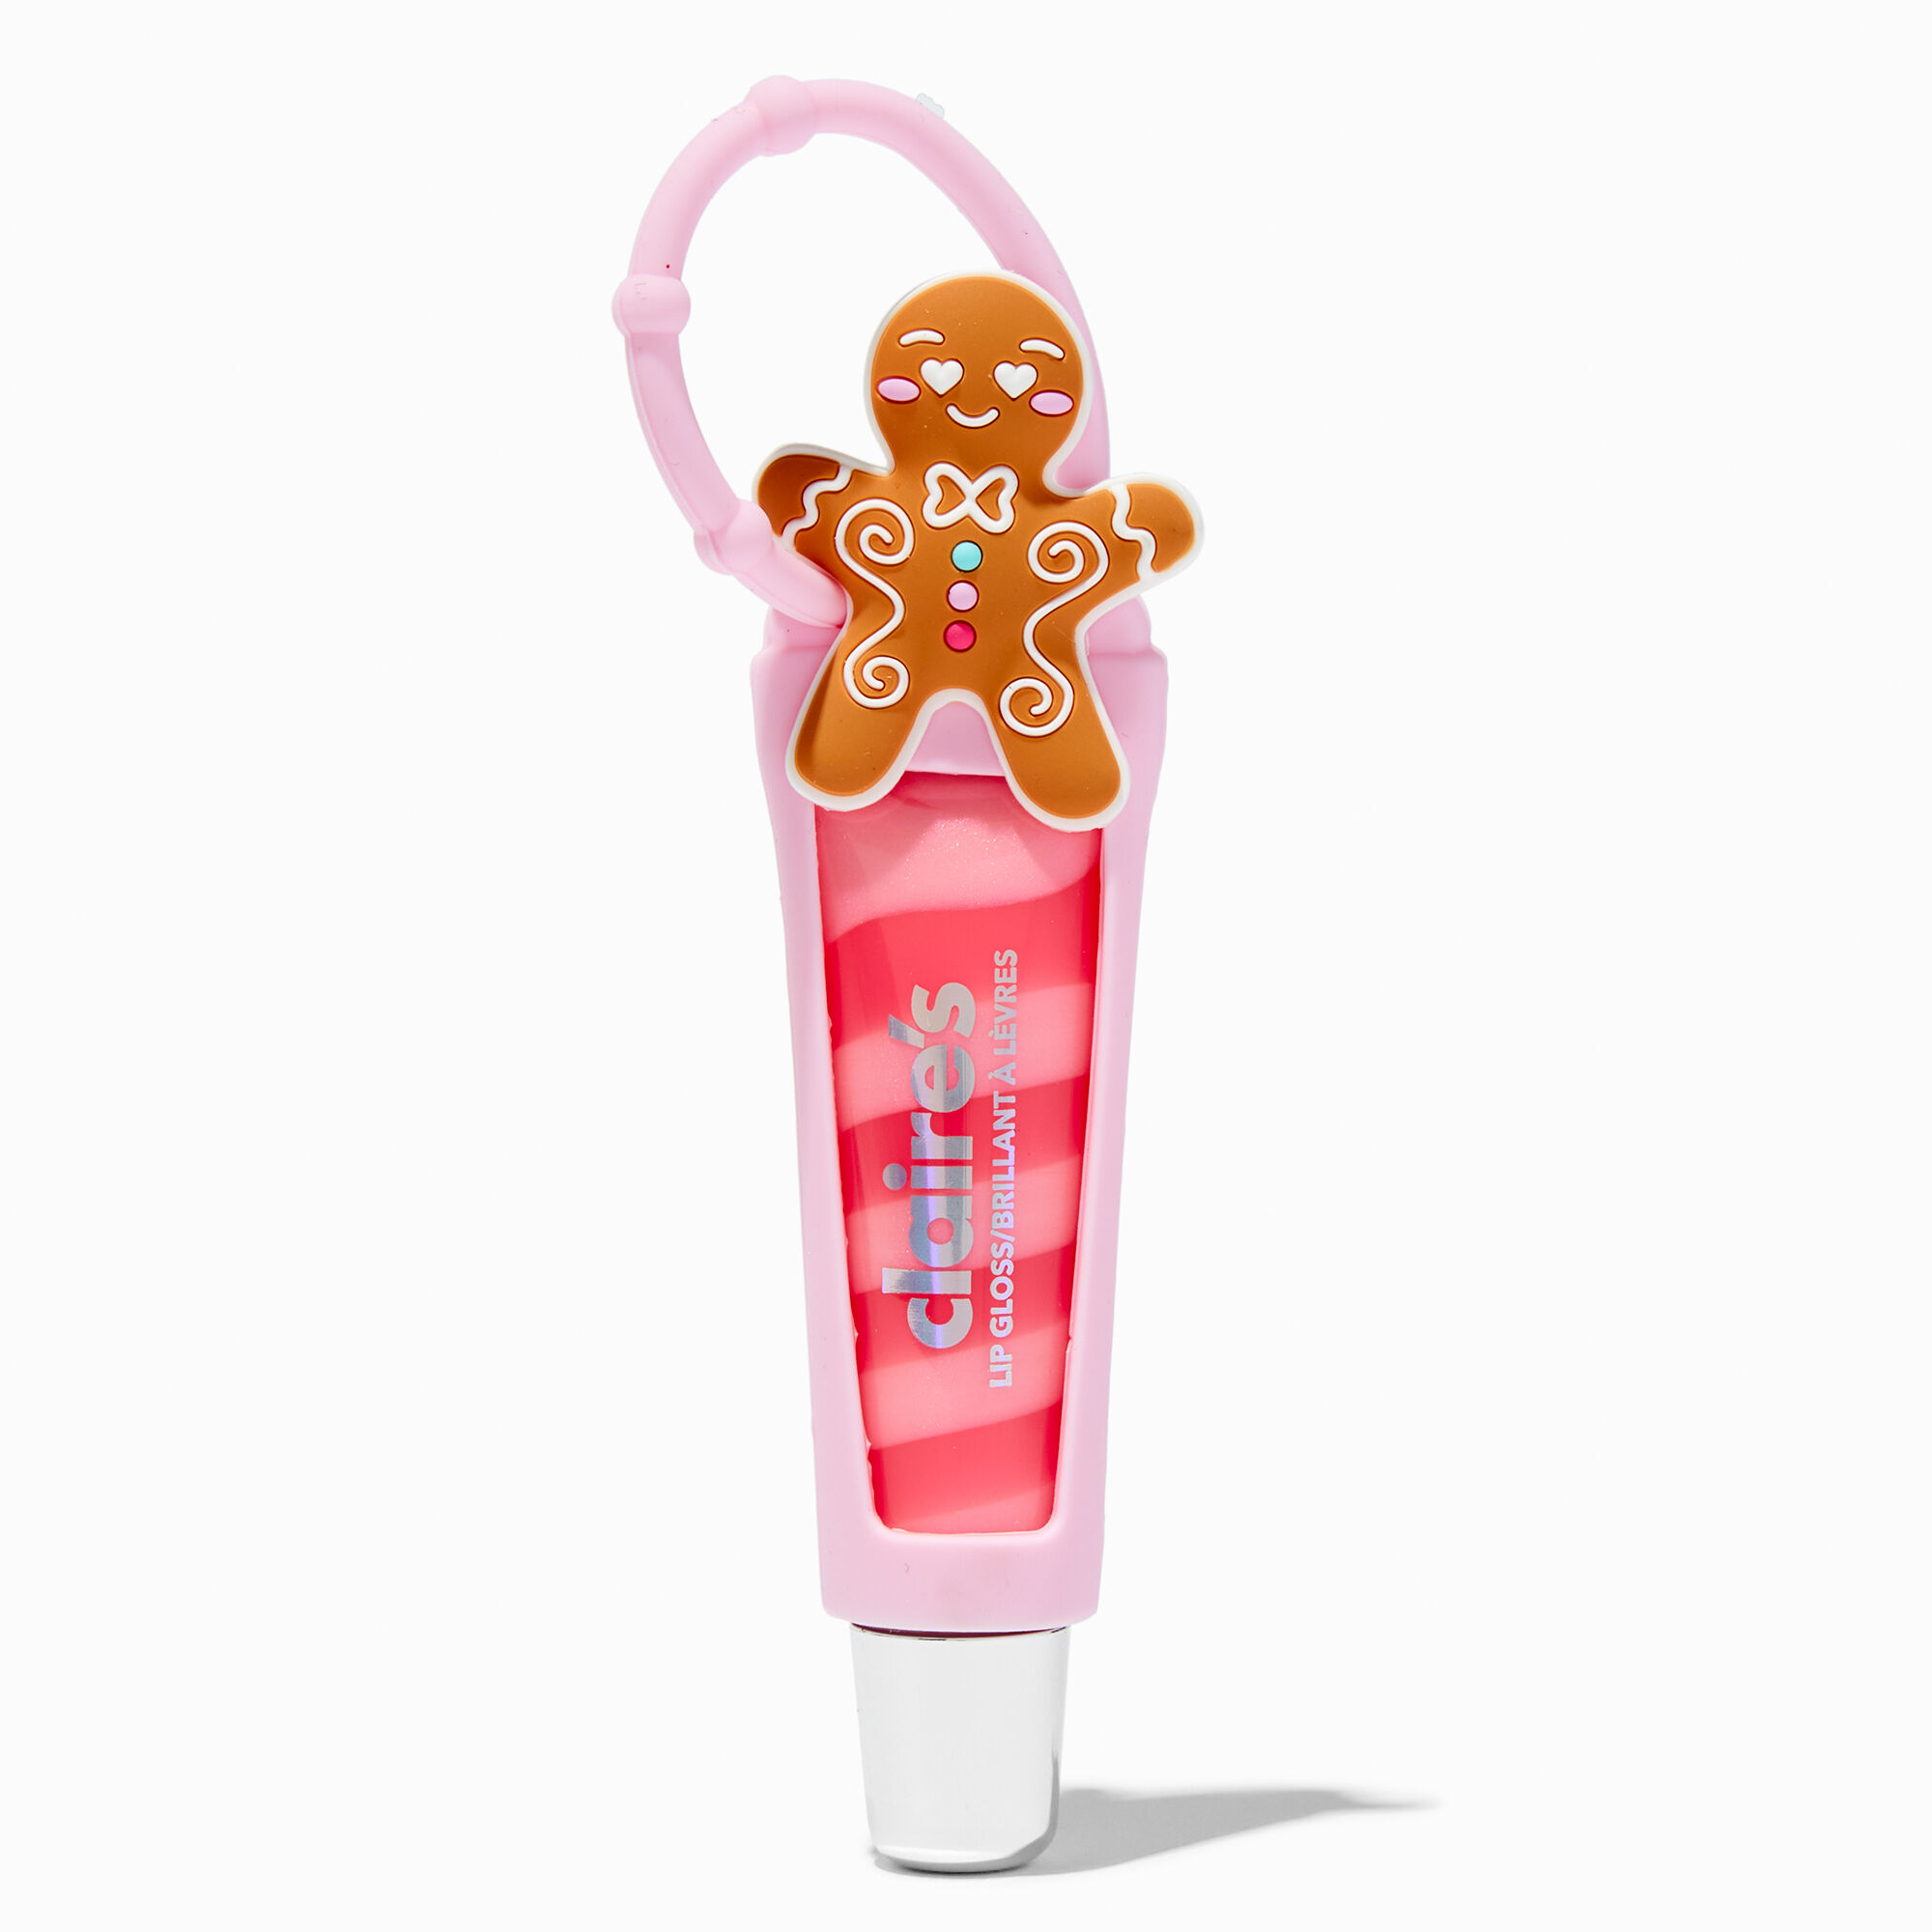 View Claires Gingerbread Holder With Swirl Lip Gloss Tube information